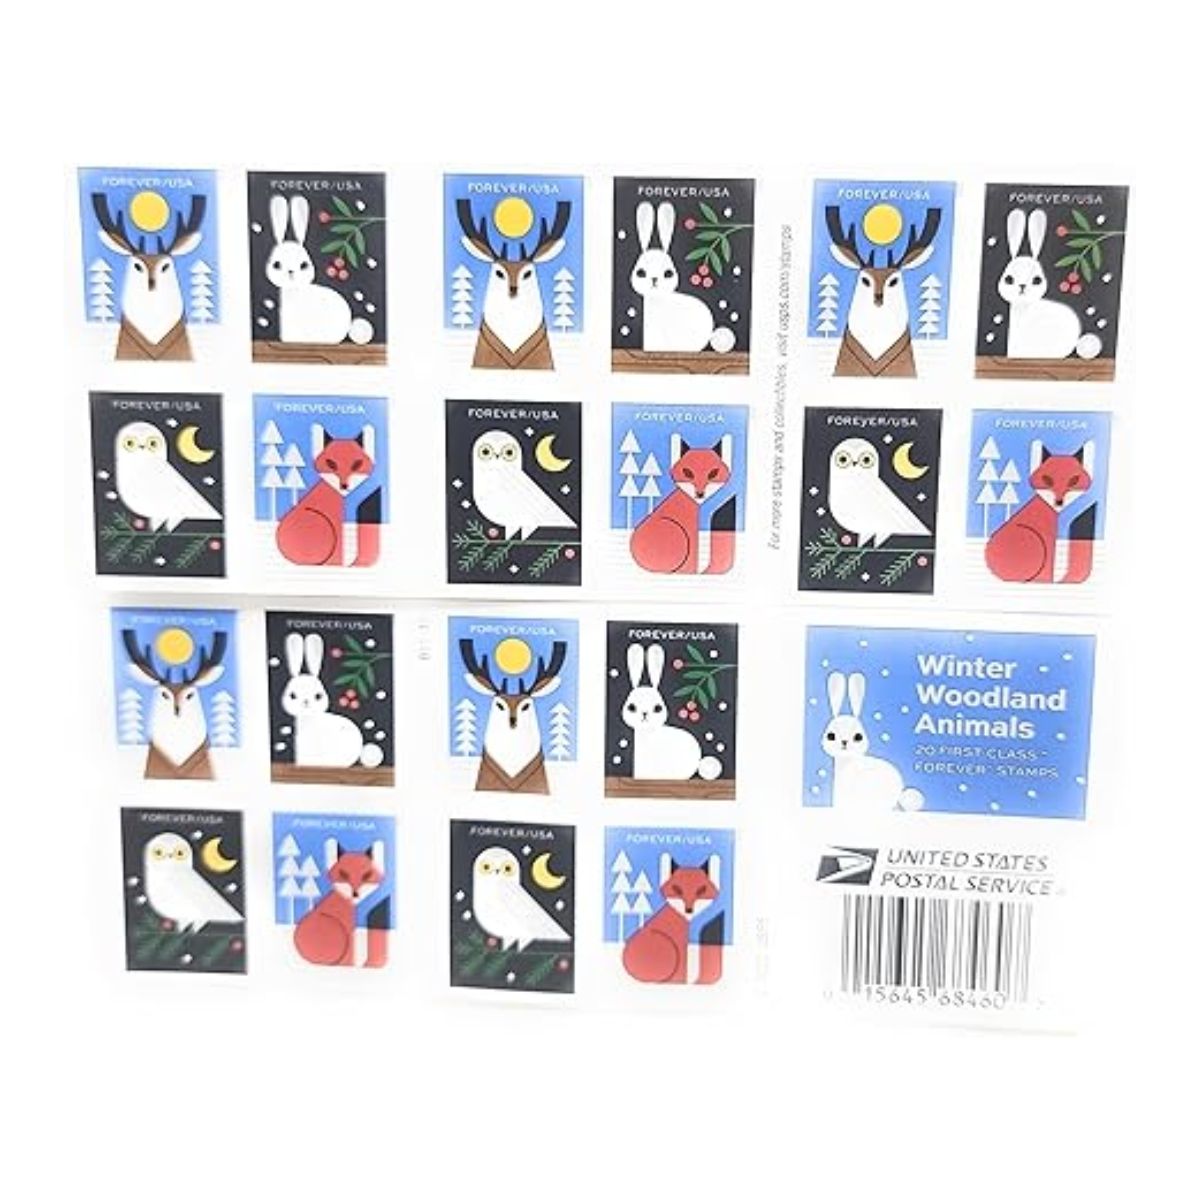 First -Class Winter Woodland Animals Postage Stamps Booklet of 20